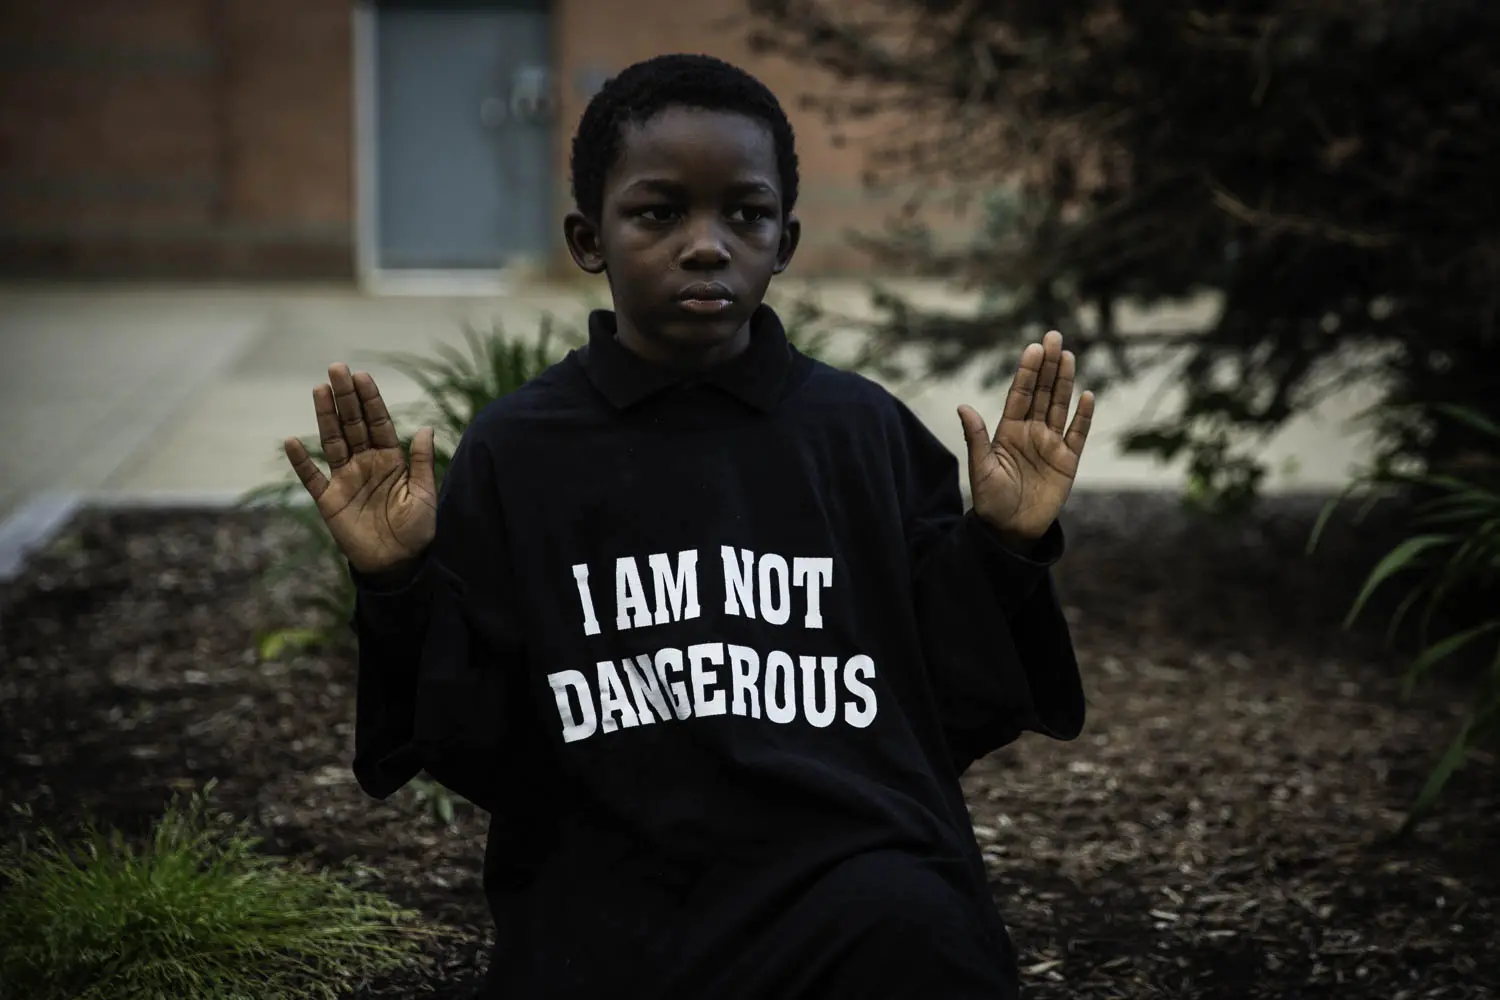 A young boy holds his hands up while wearing a shirt that reads "I am not dangerous."